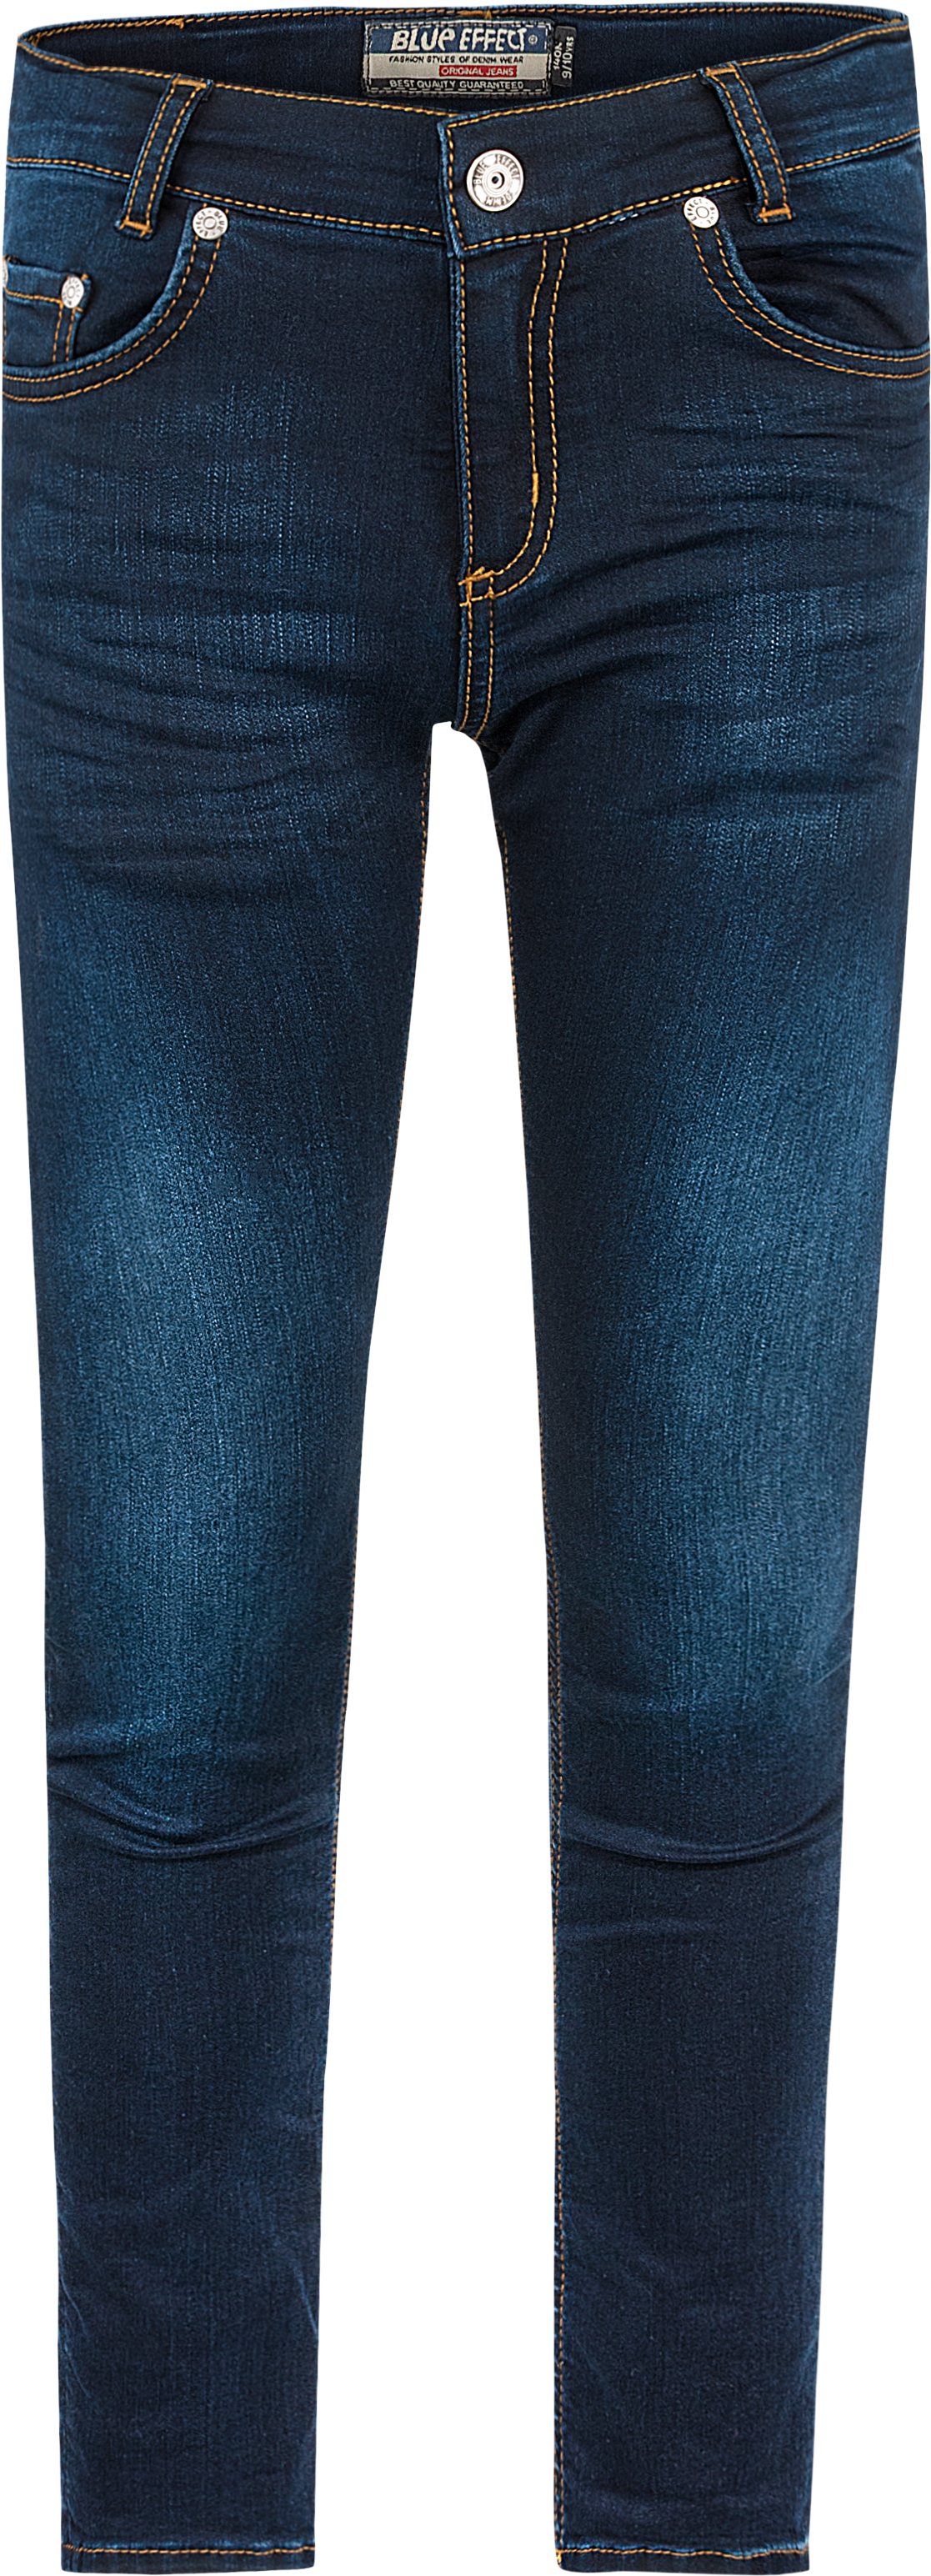 0231-NOS Boys Jeans Special Skinny, Ultrastretch, available in Slim,Normal,Wide